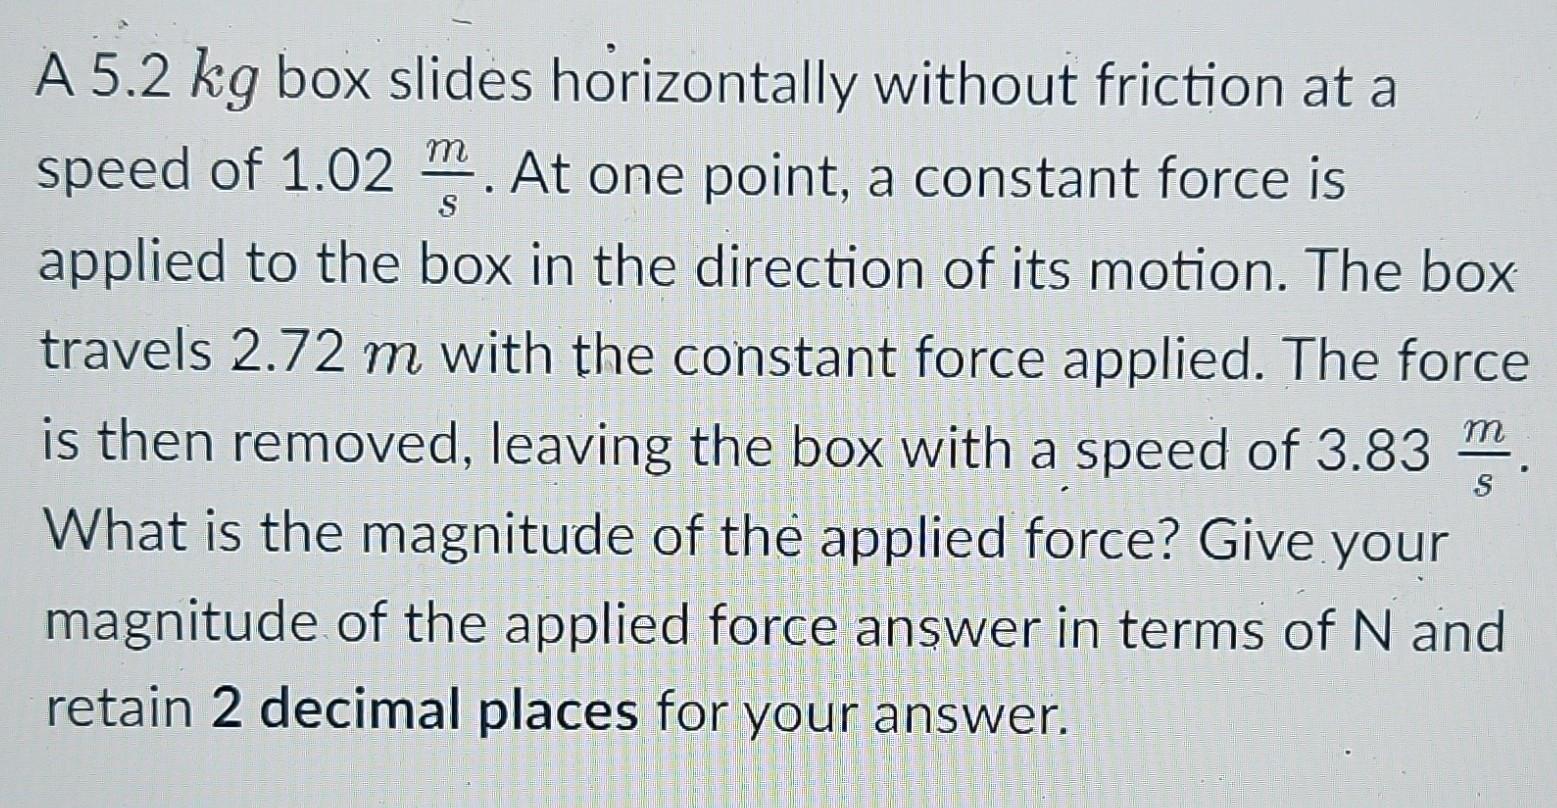 A 5.2 kg box slides horizontally without friction at a S speed of 1.02 m. At one point, a constant force is